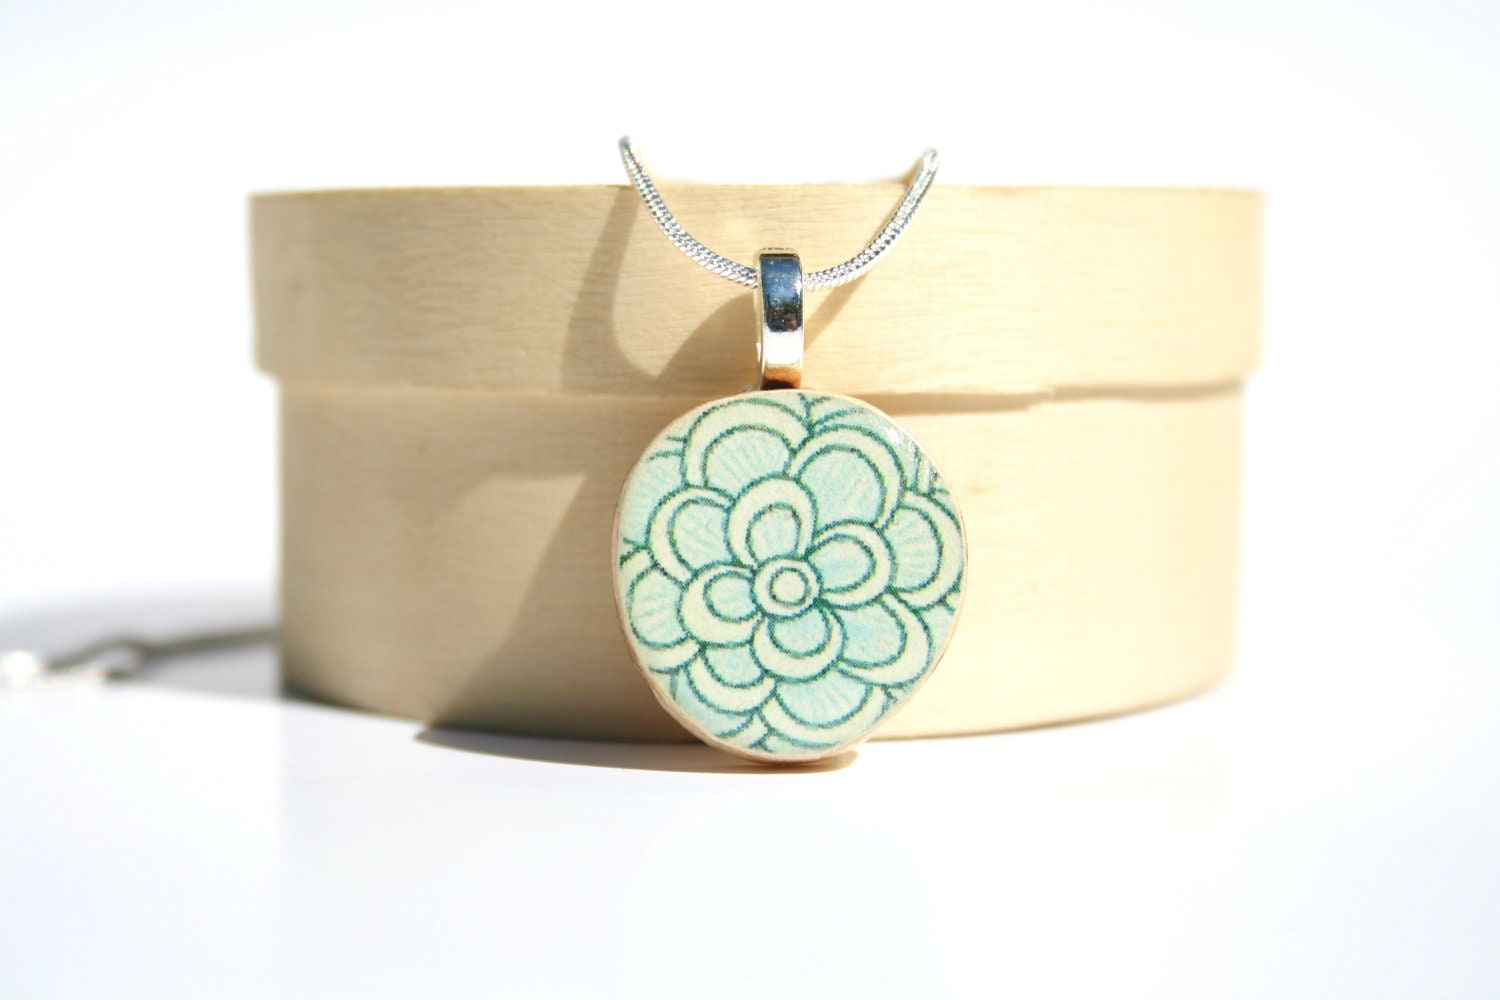 Blue Floral Pendant necklace best friend gift Unique gifts wood gifts floral nature lover gifts circle pendant eco friendly - starlightwoods